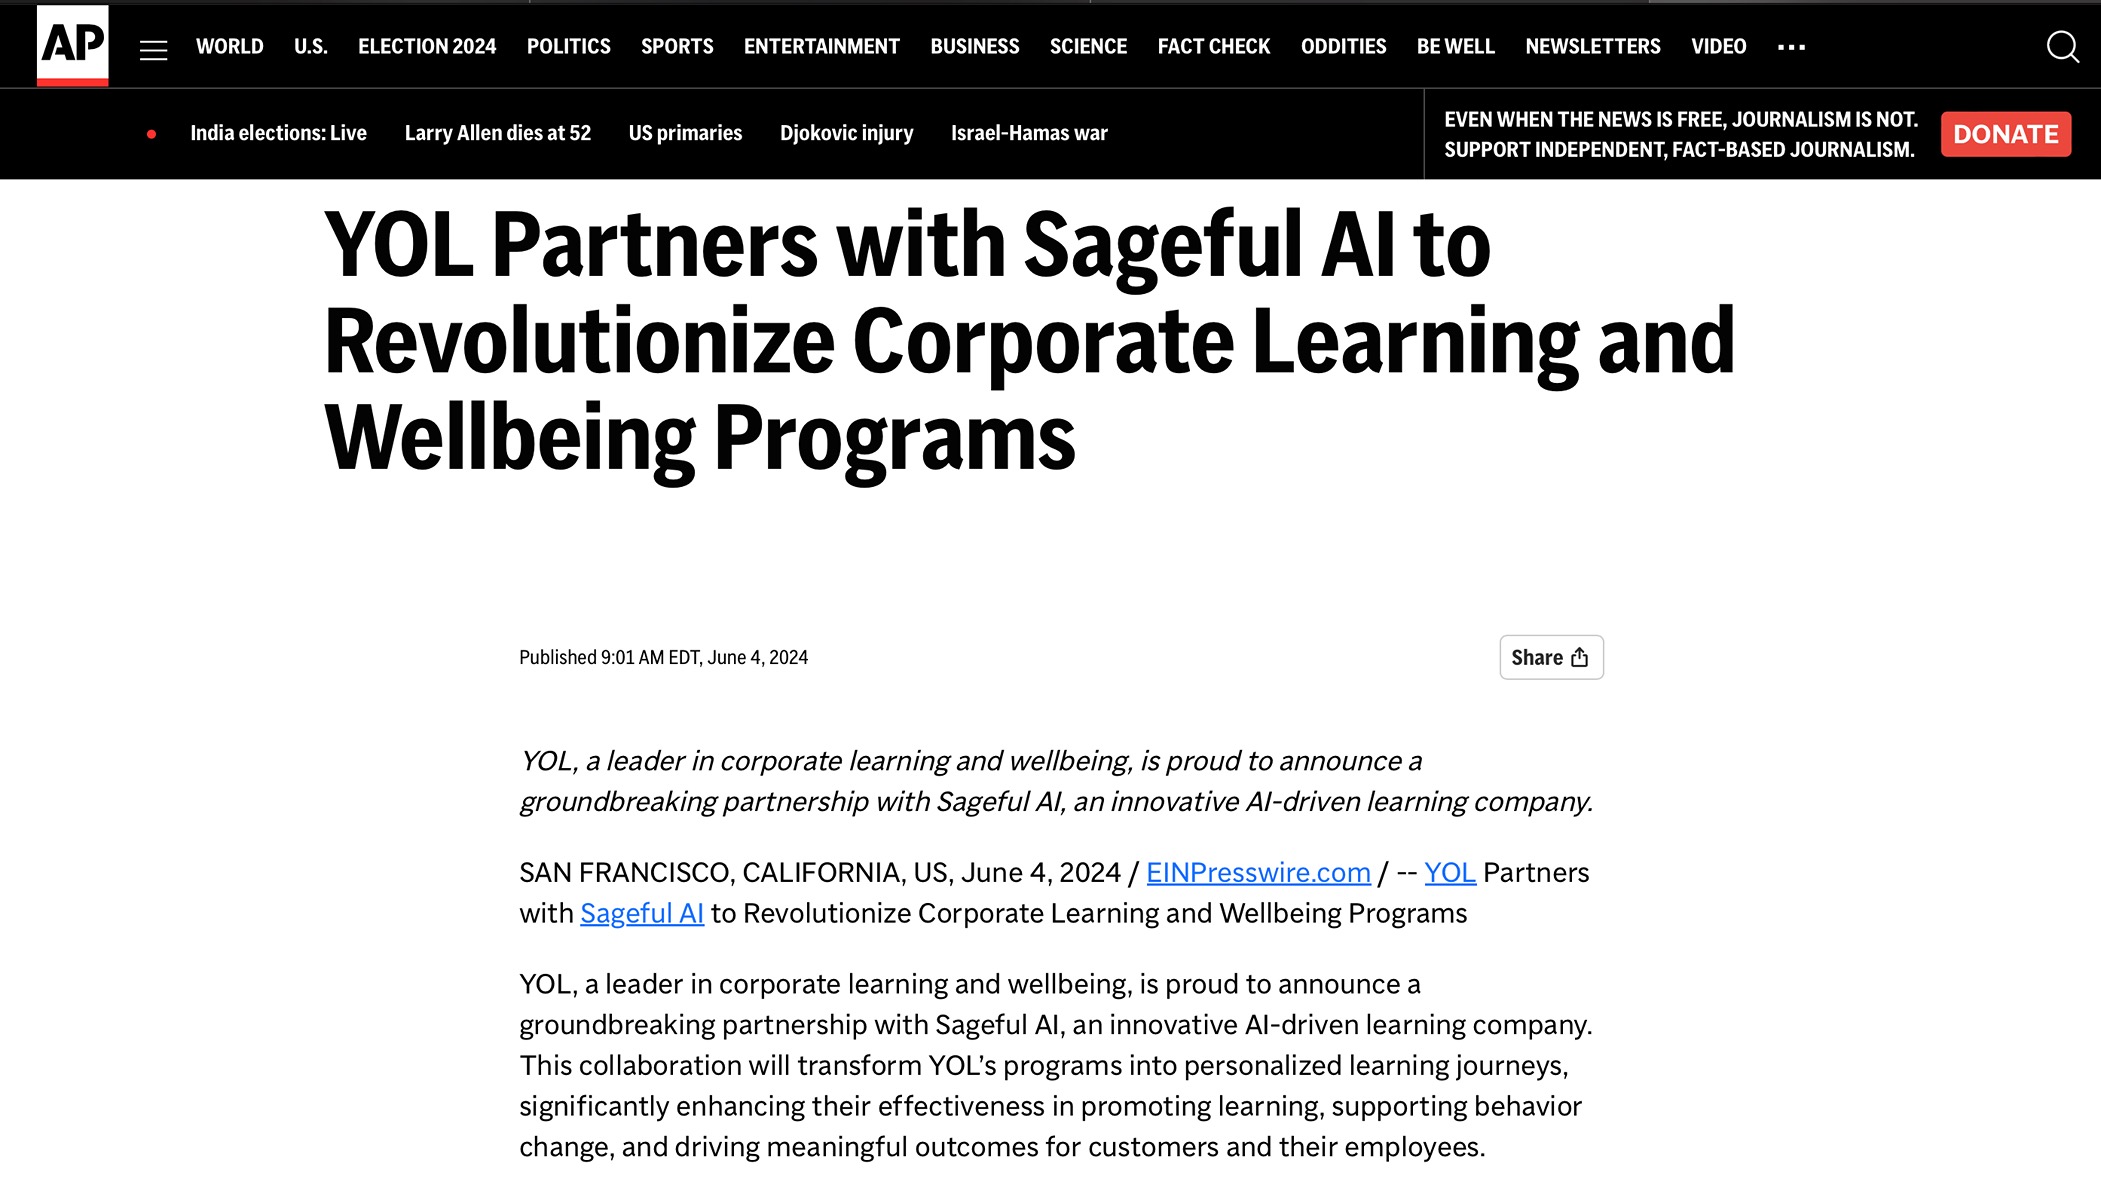 YOL Partners with Sageful Al to Revolutionize Corporate Learning and Wellbeing